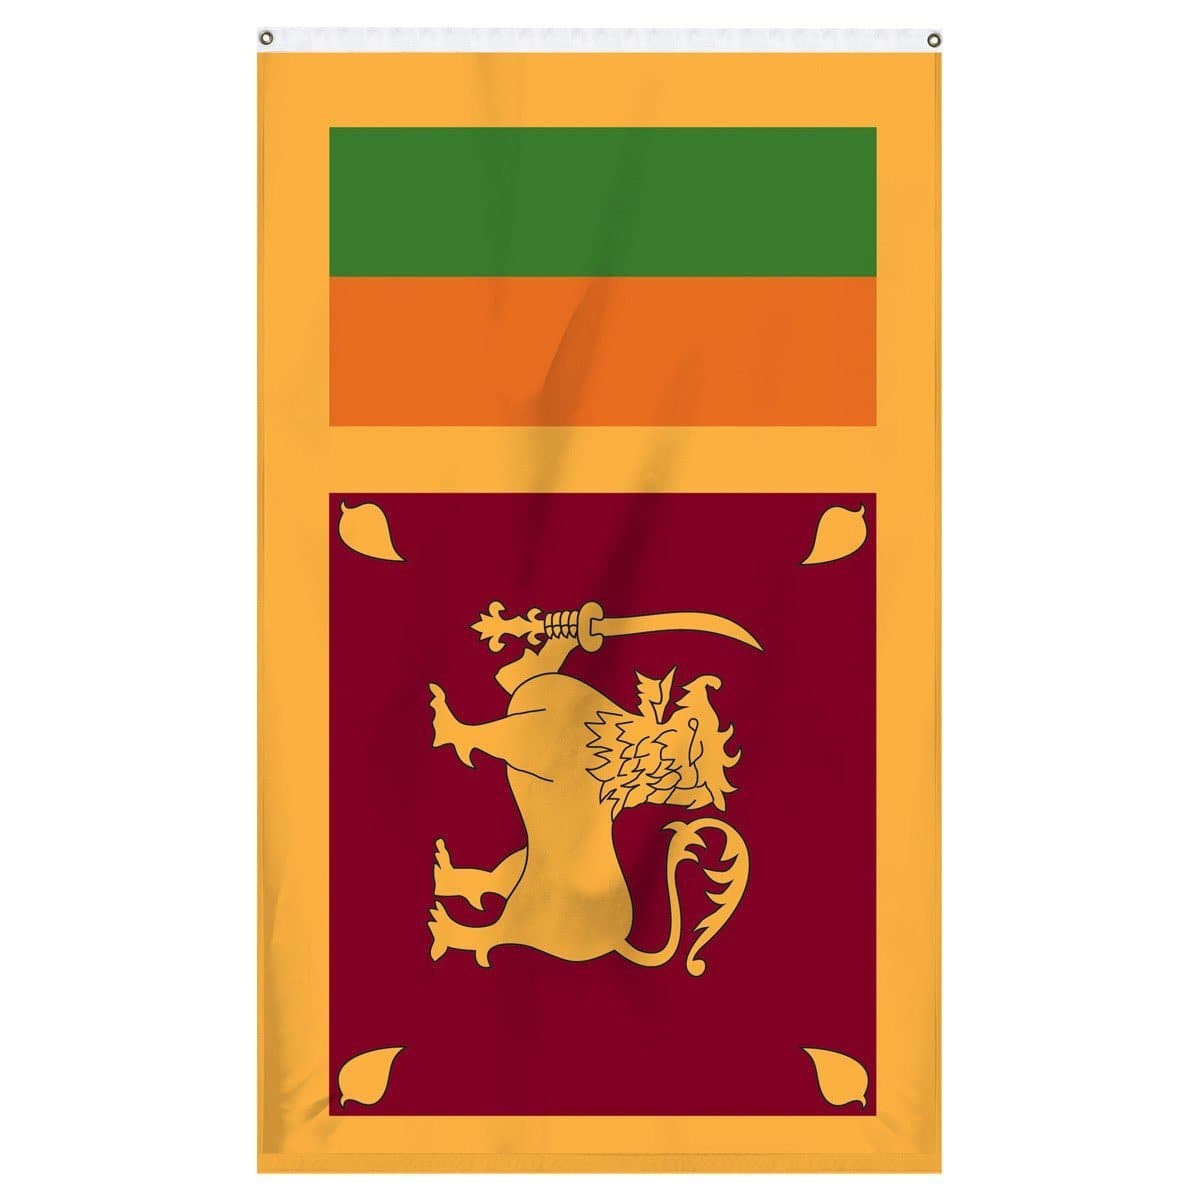 Sri Lanka National flag for sale to buy online from Atlantic Flag and Pole. Yellow, green, and orange flag with a lion holding a sword.